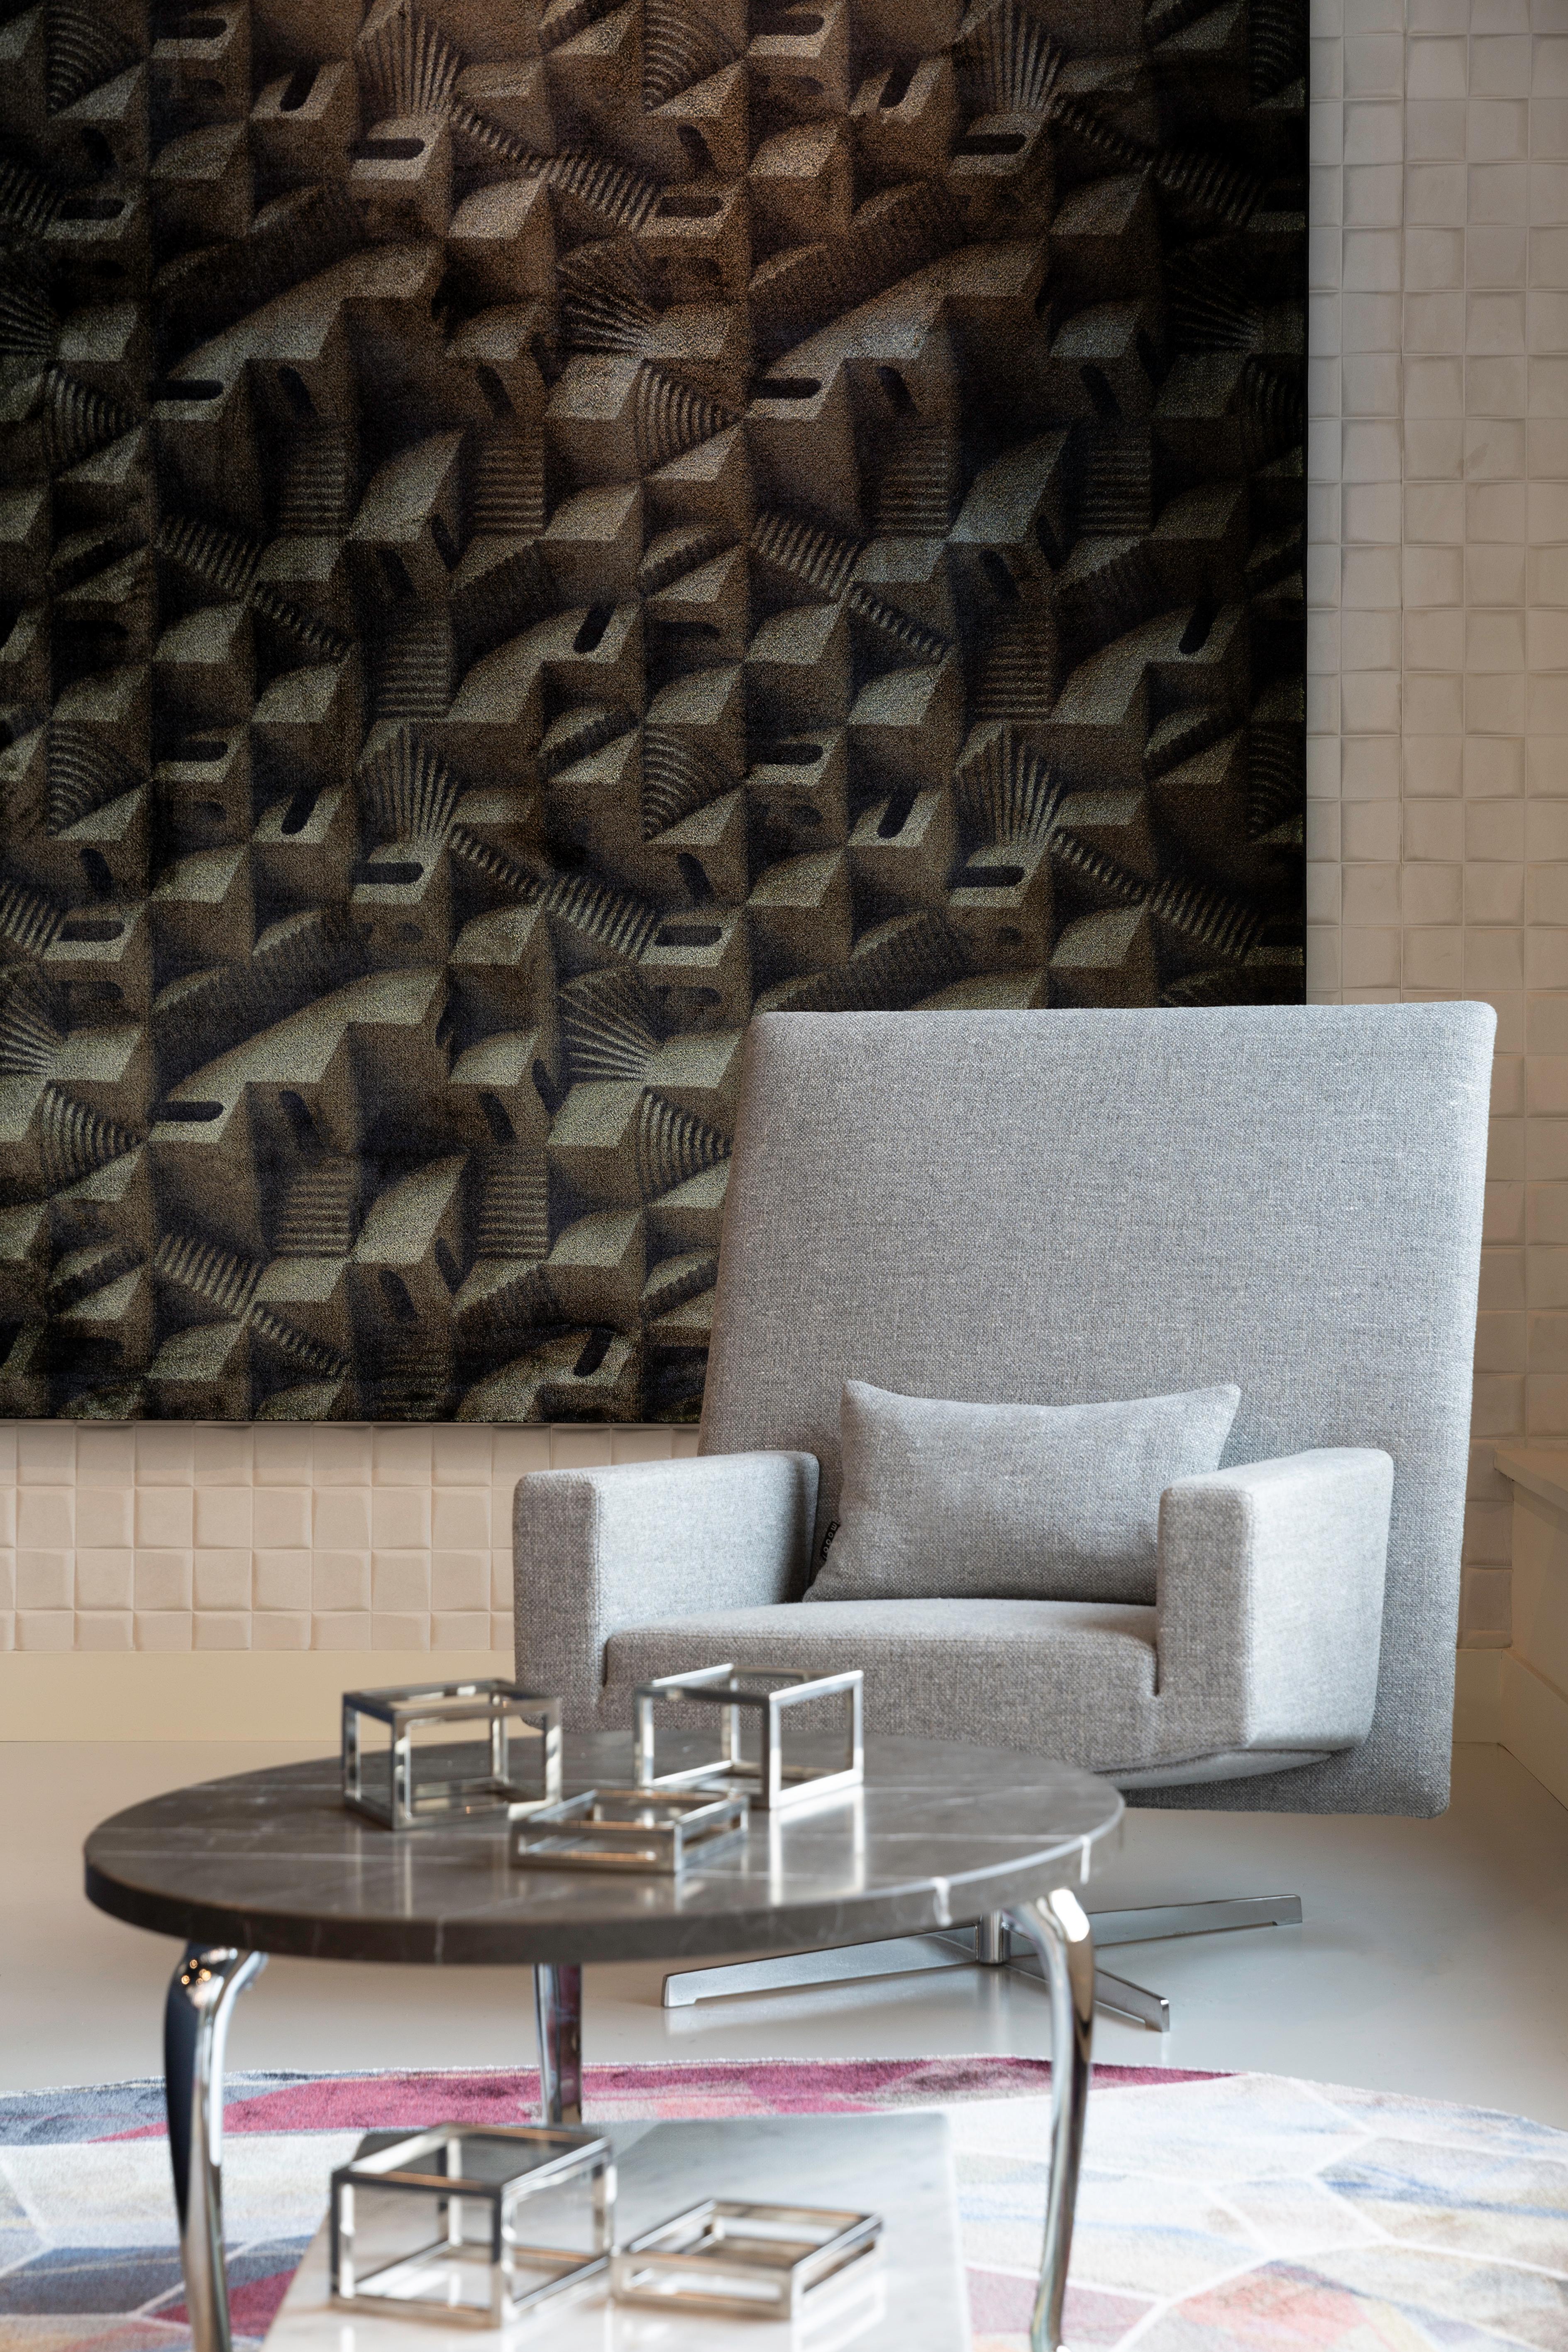 Moooi small maze Puglia rectangle rug rug in wool with Blind Hem Finish by Note.

Note is a Stockholm based multi disciplinary design studio, founded in 2008. They collaborate intensely with passion, to share their insights with the world.